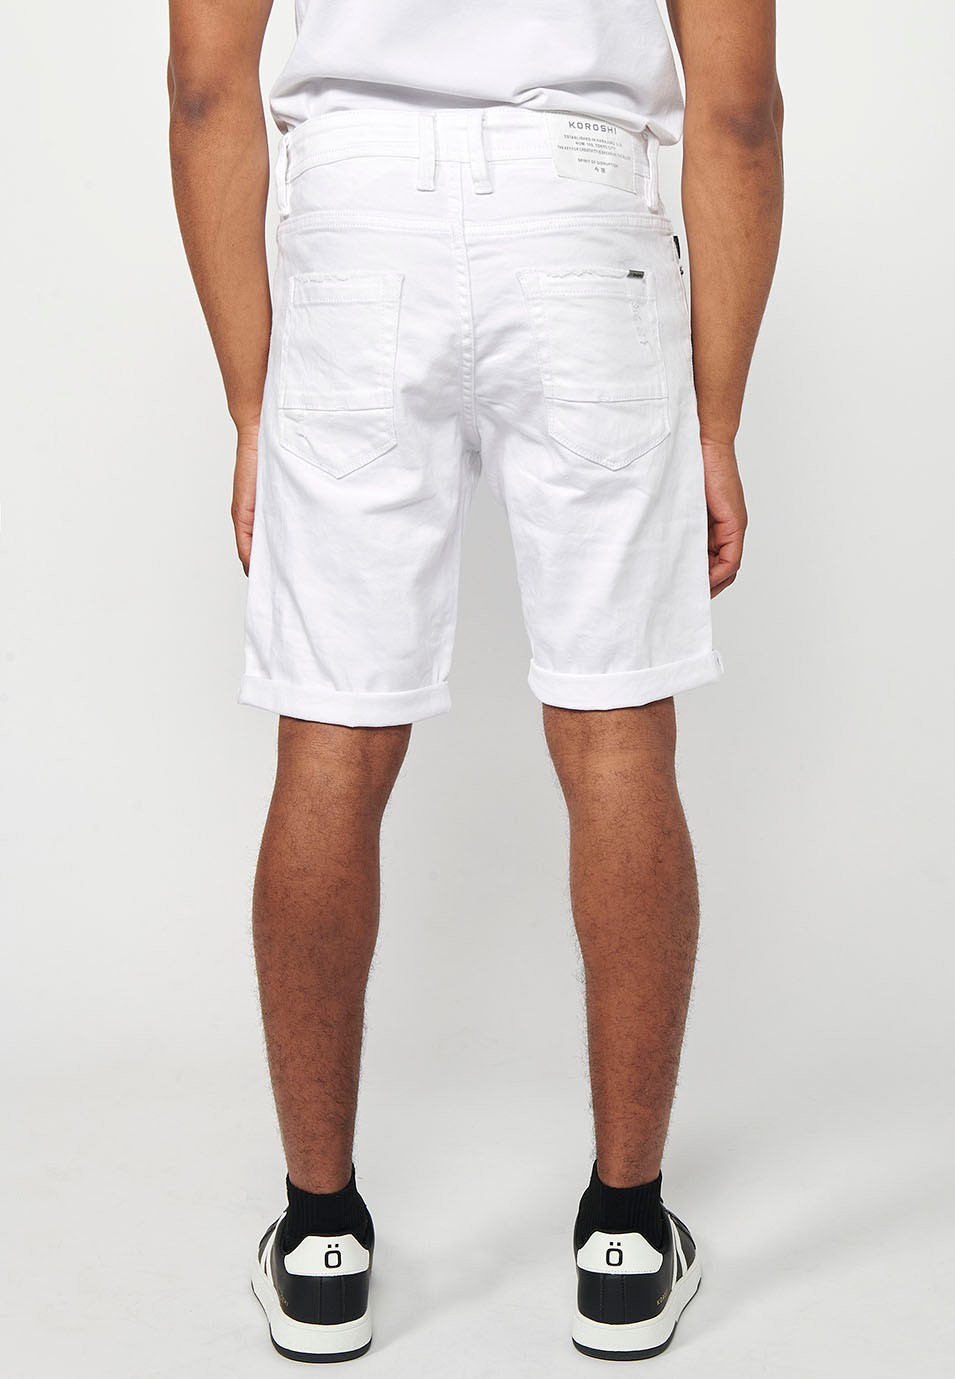 Denim Bermuda shorts with turn-up finish and front closure with zipper and button in White for Men 1